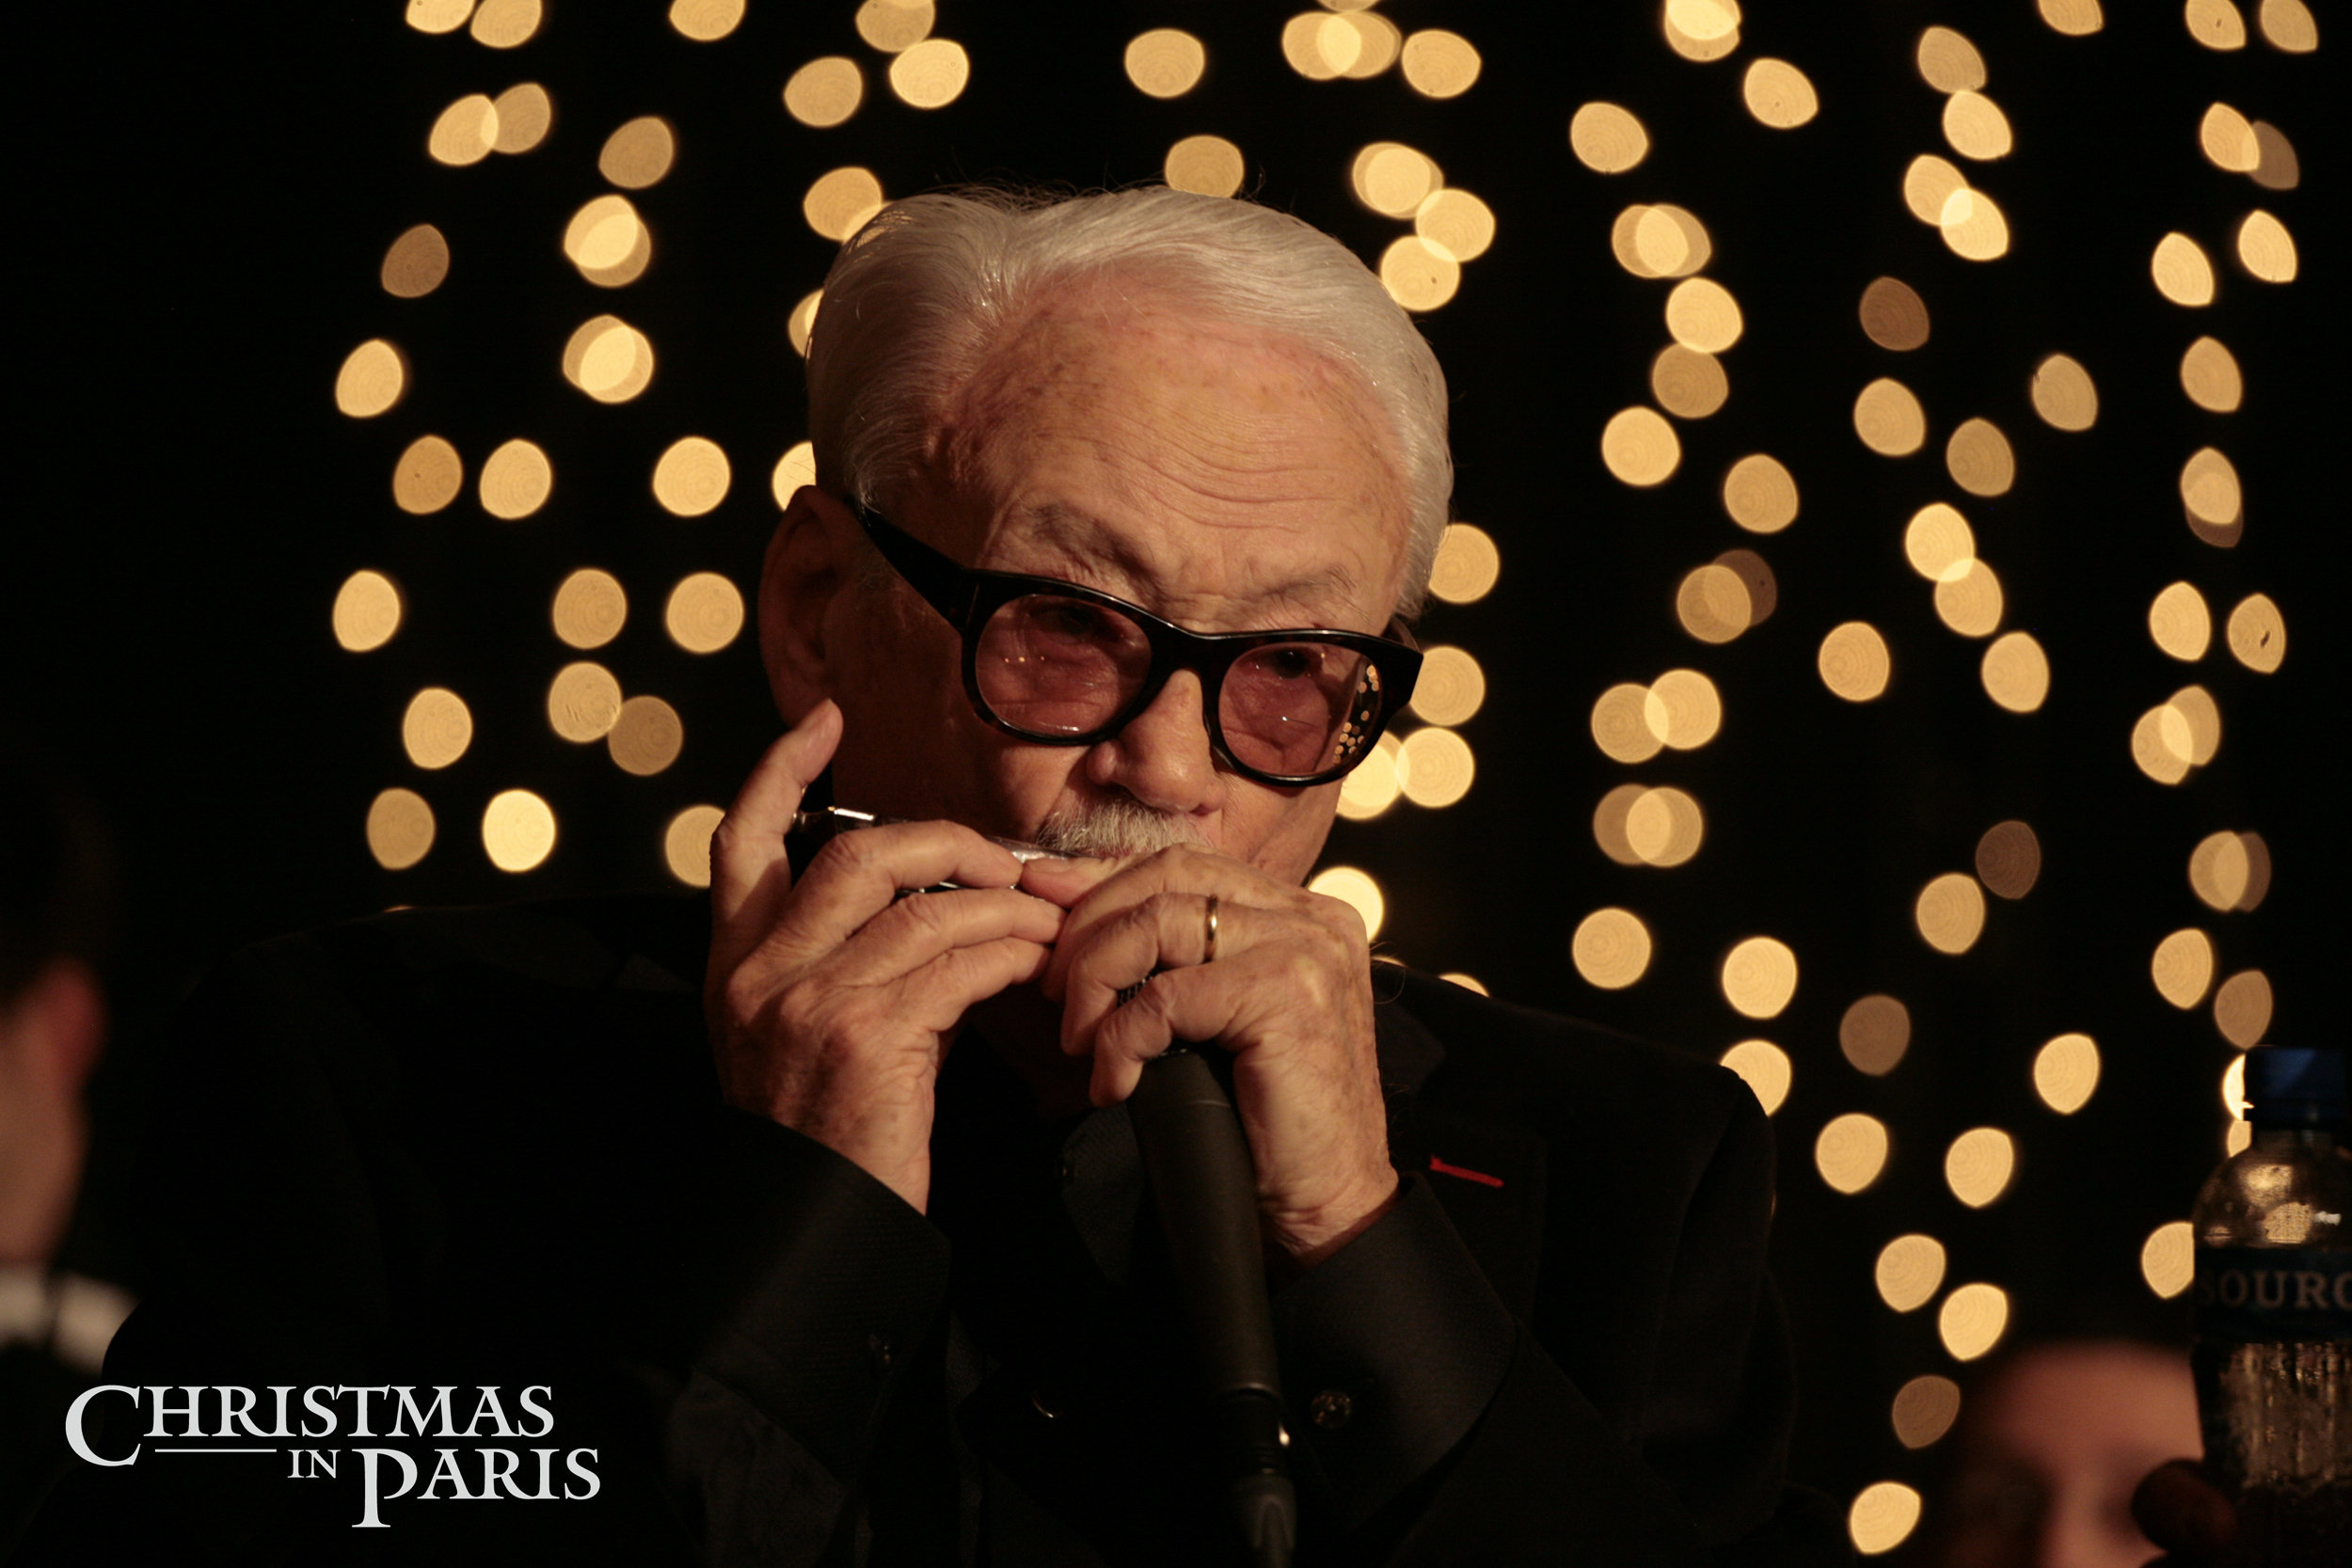 Toots Thielemans in Christmas in Paris (2008)